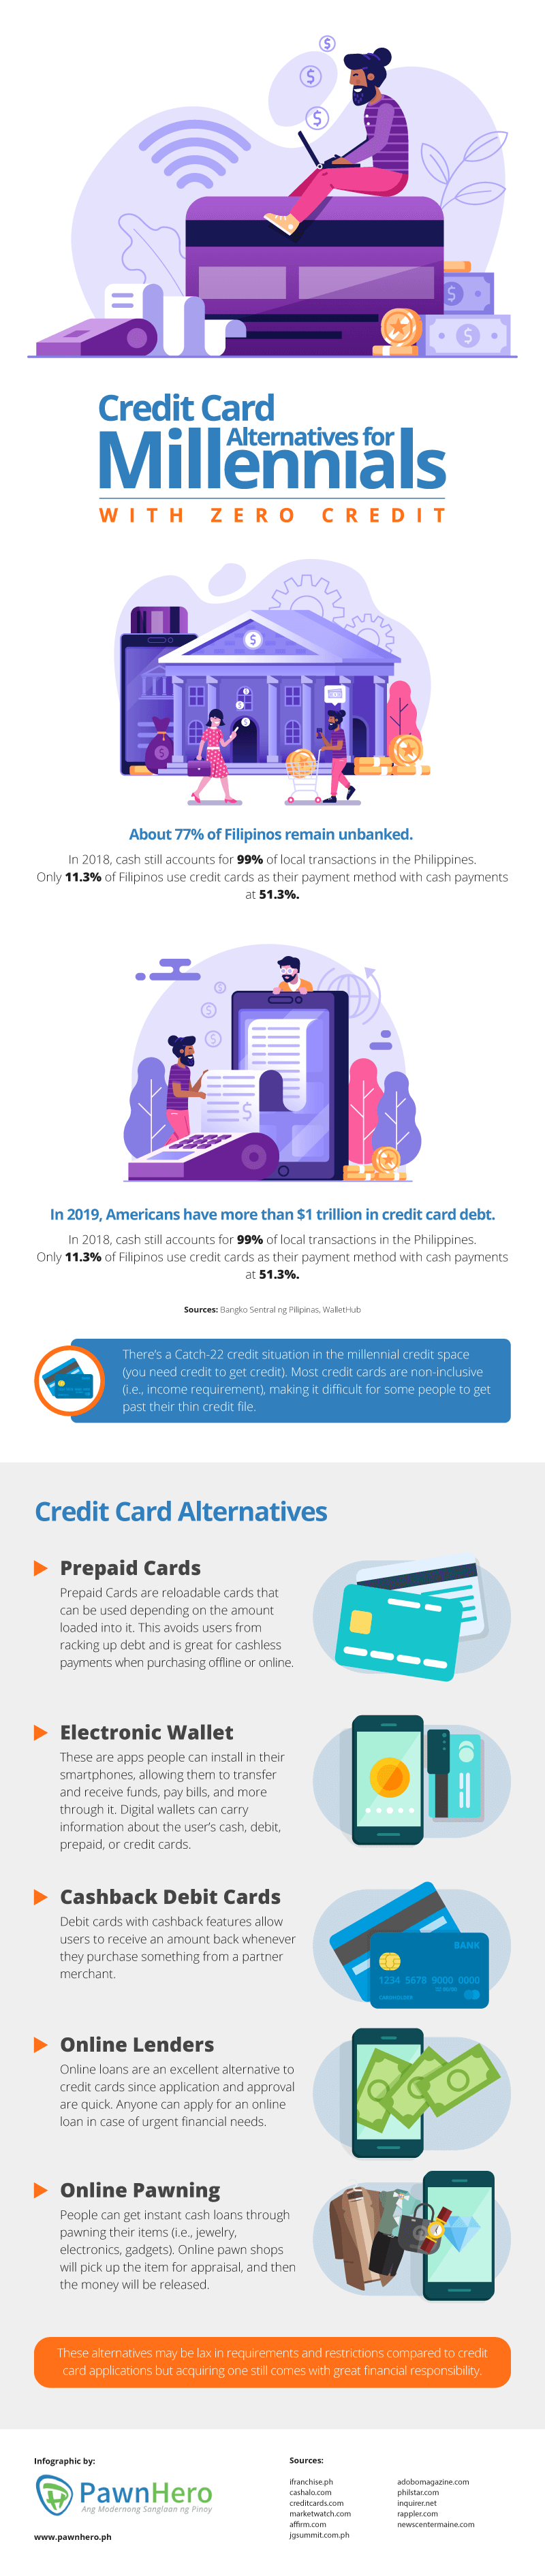 Credit Card Alternatives for Millennials with Zero Credit